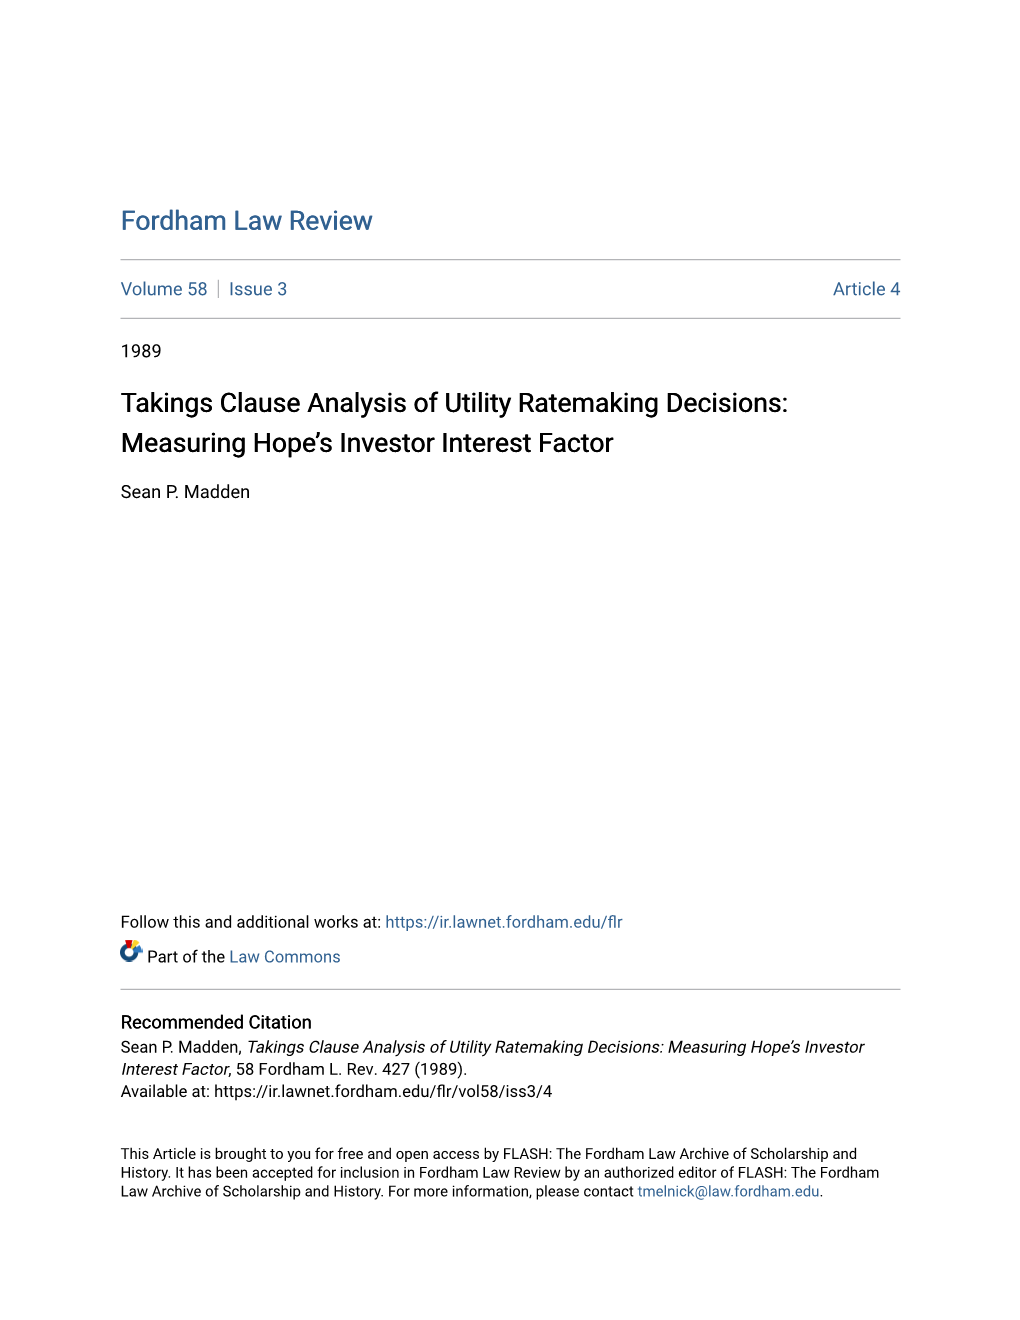 Takings Clause Analysis of Utility Ratemaking Decisions: Measuring Hope’S Investor Interest Factor